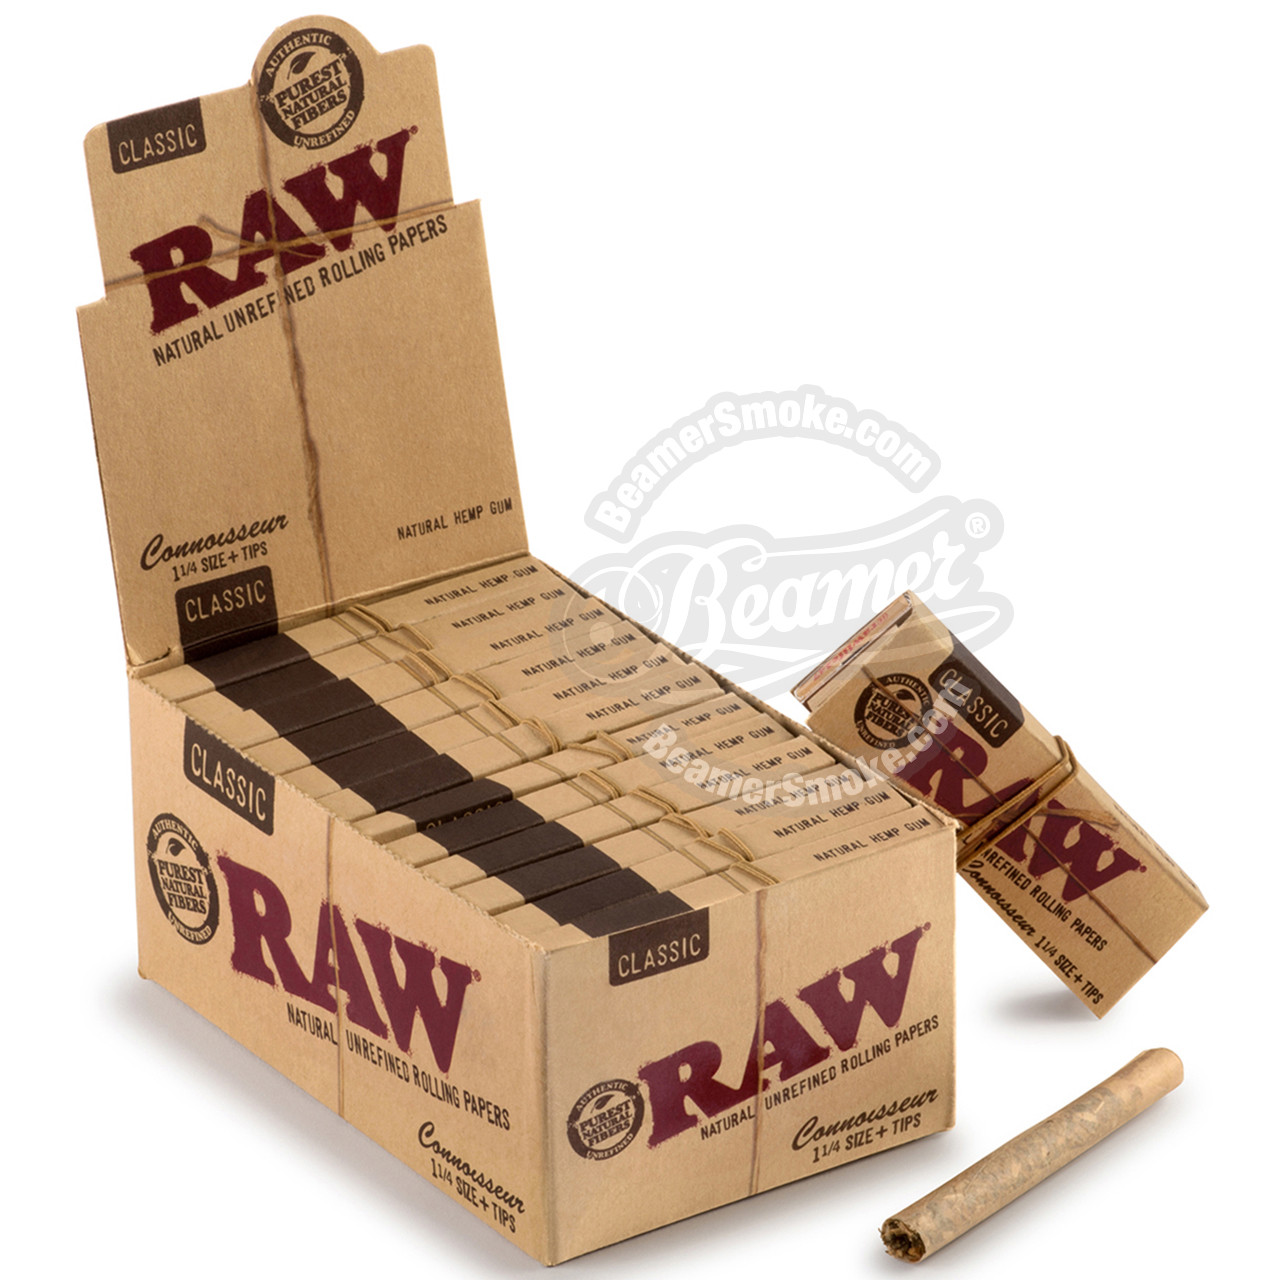 Papelillos Raw 1 1 /4 + Tips (Connoisseur) - Display